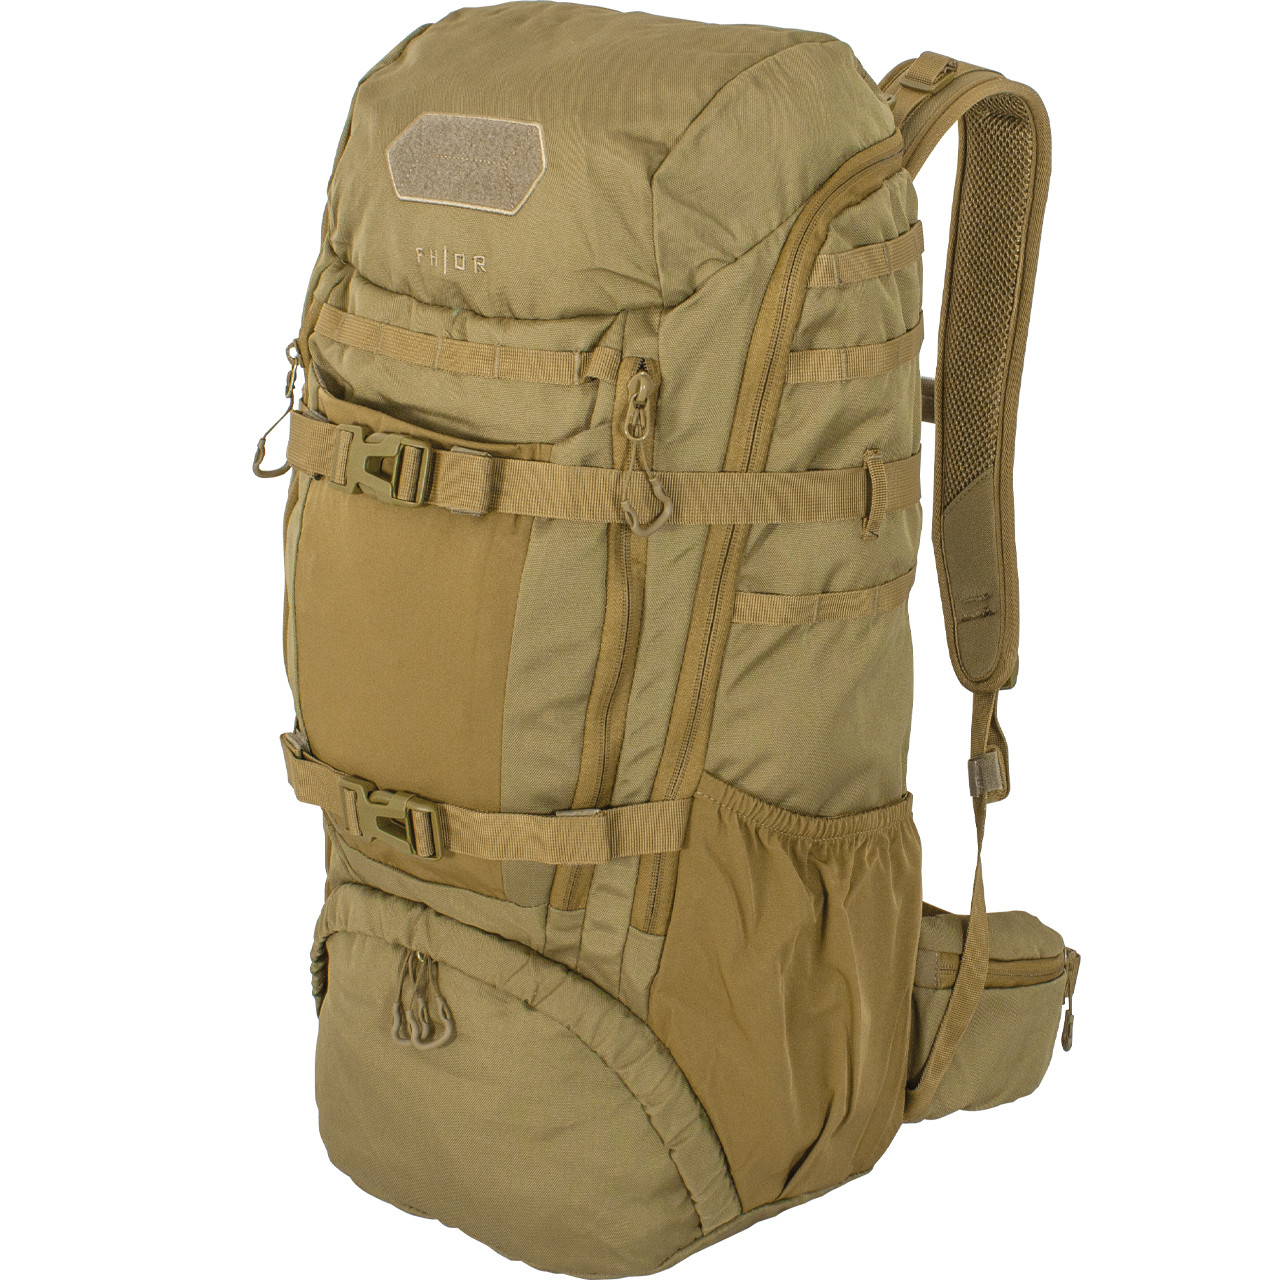 FHIOR - 40 Liter Tactical Backpack - Red Rock Outdoor Gear